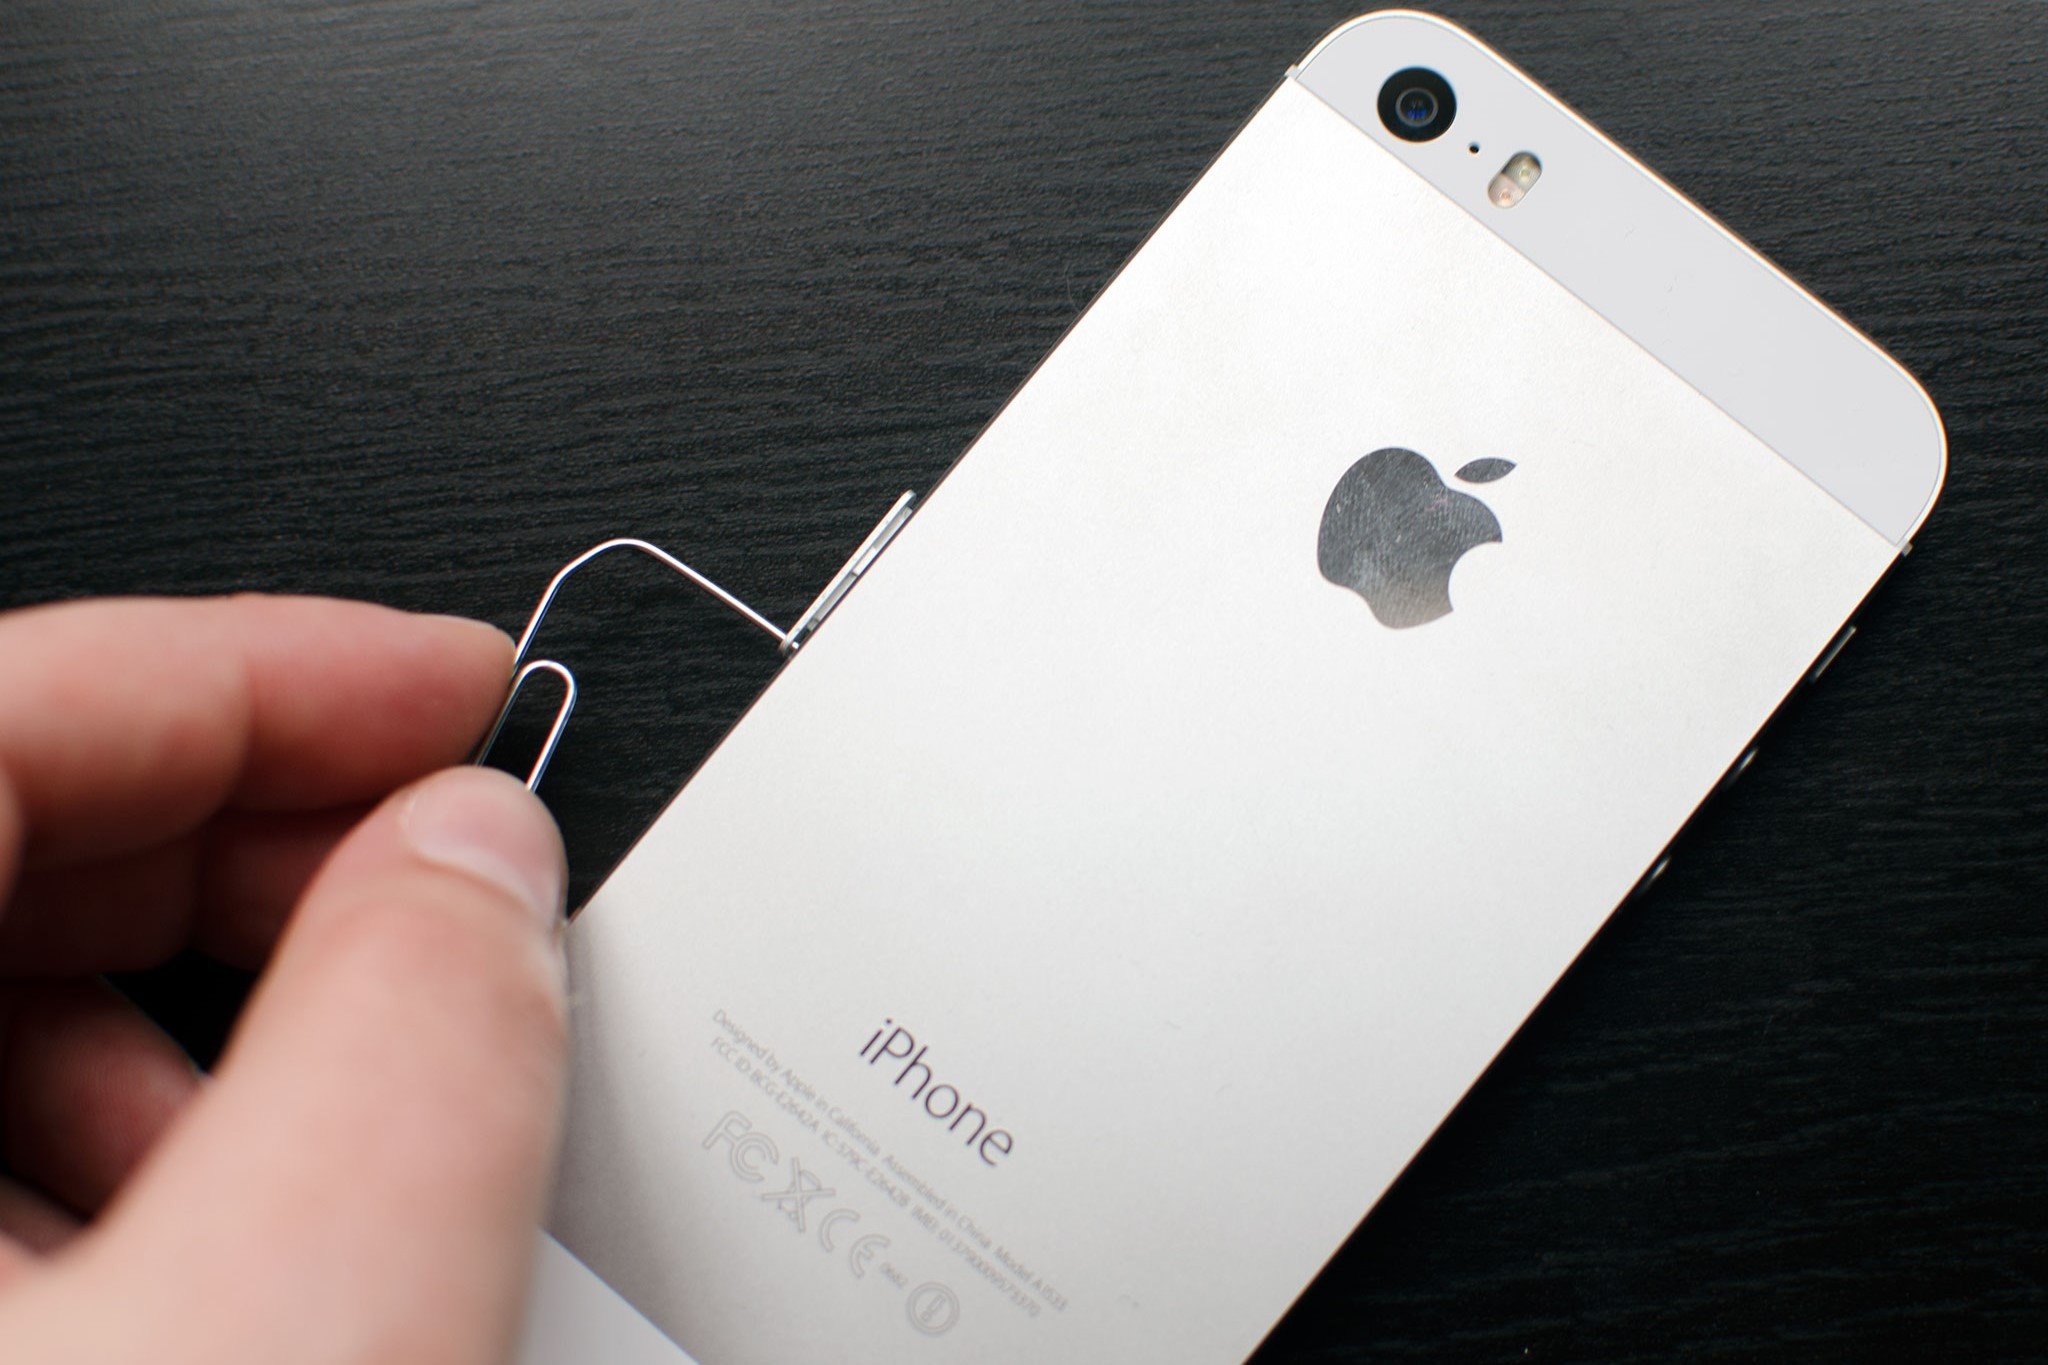 Transferring Your SIM Card To A New IPhone: Step-by-Step Guide